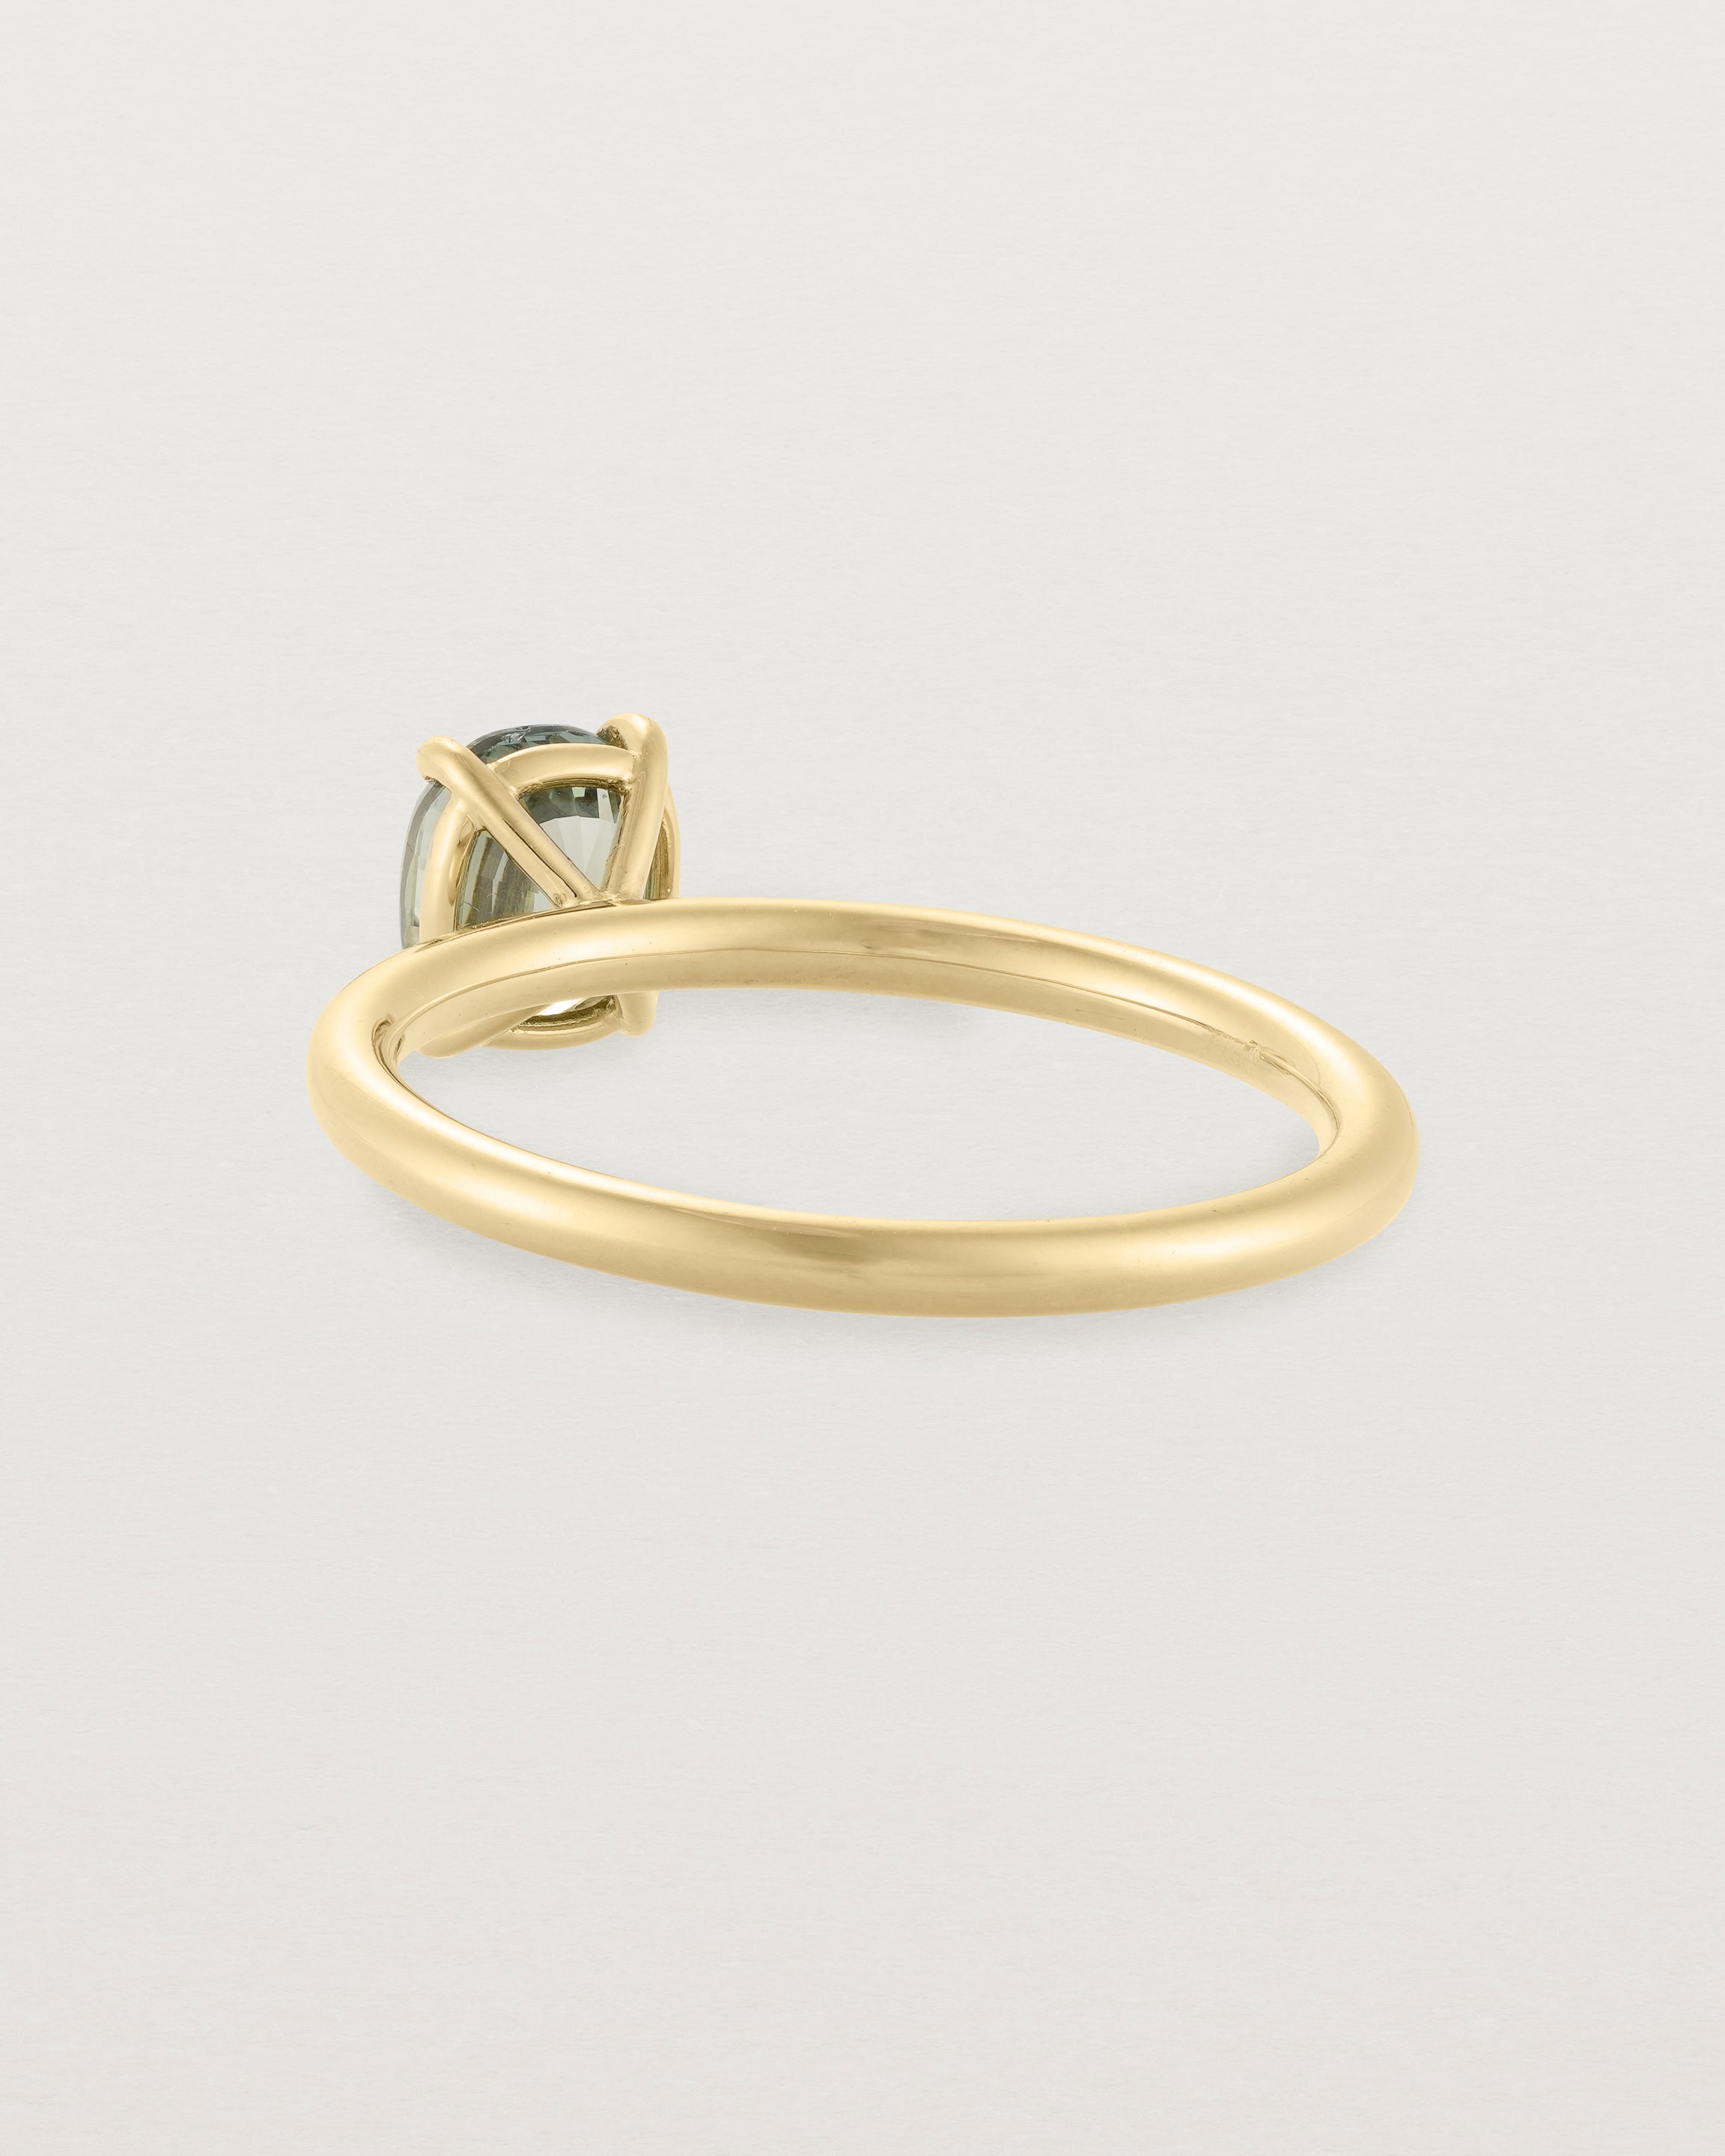 Back view of a striking 0.89 cushion cut Parti Sapphire, sits on a 1.6mm round band and crafted in 18ct Yellow Gold.